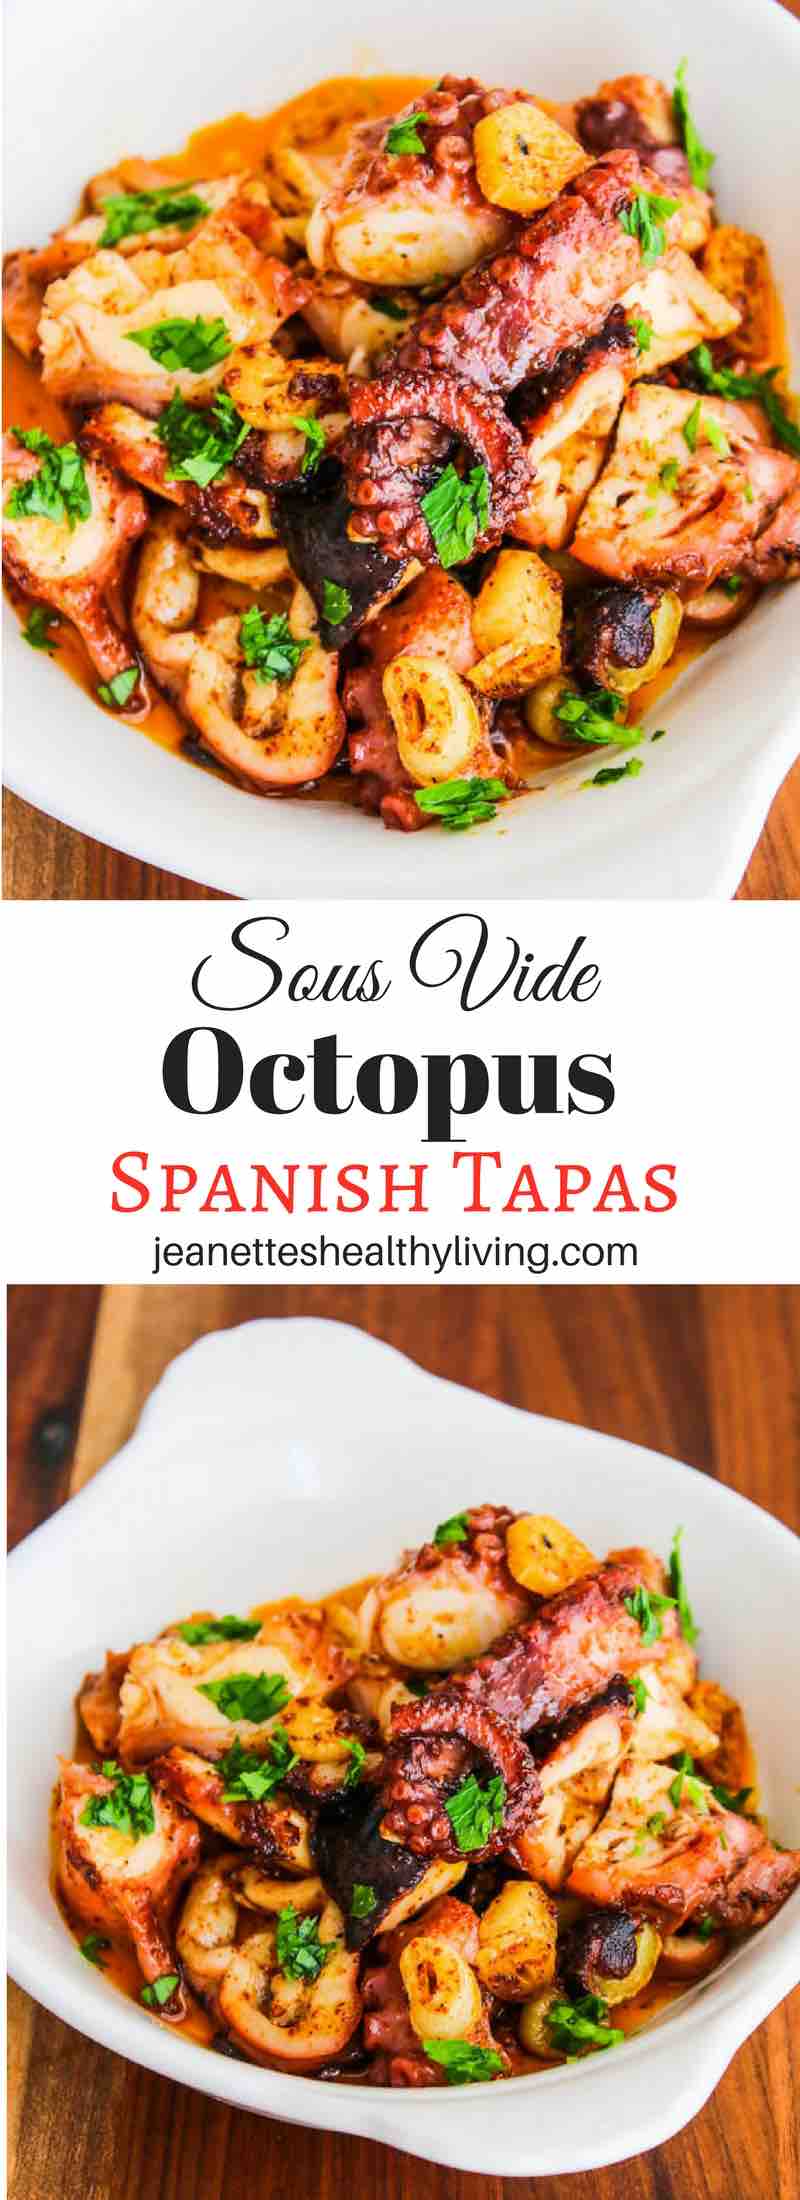 Sous Vide Octopus Spanish Tapas - the most tender octopus, seasoned with garlic and smoked paprika for the perfect tapas